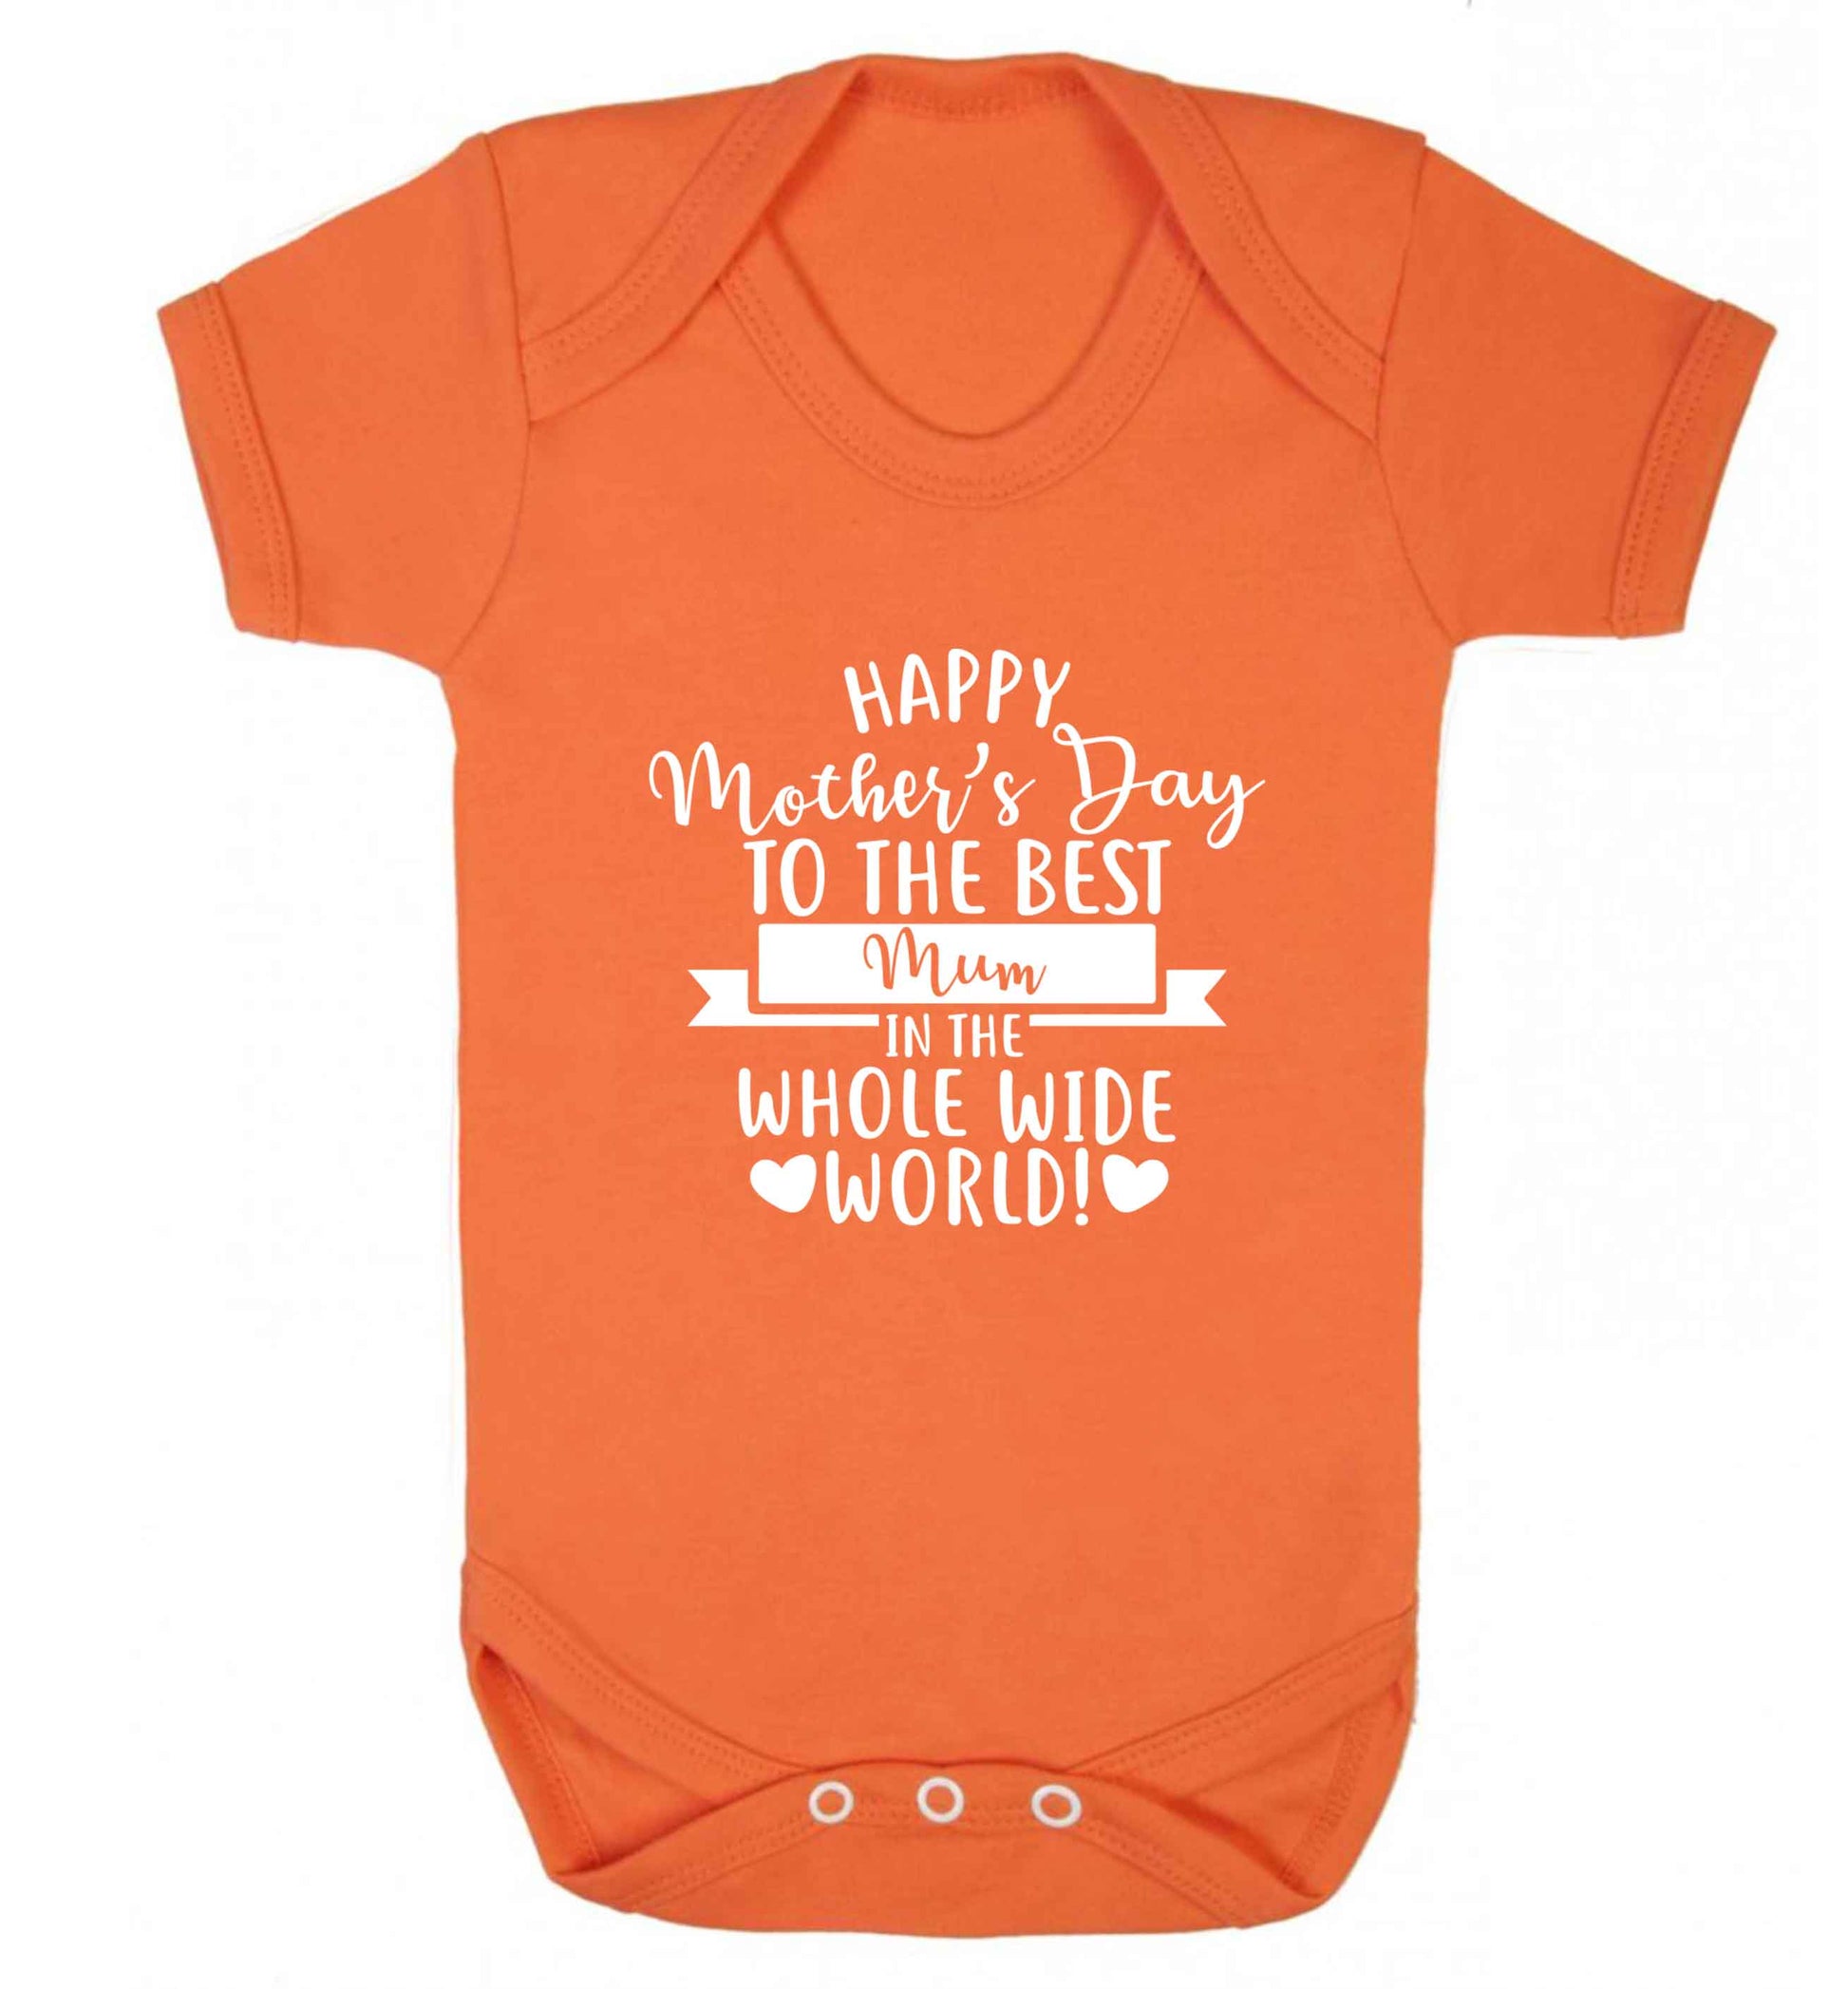 Happy mother's day to the best mum in the world baby vest orange 18-24 months